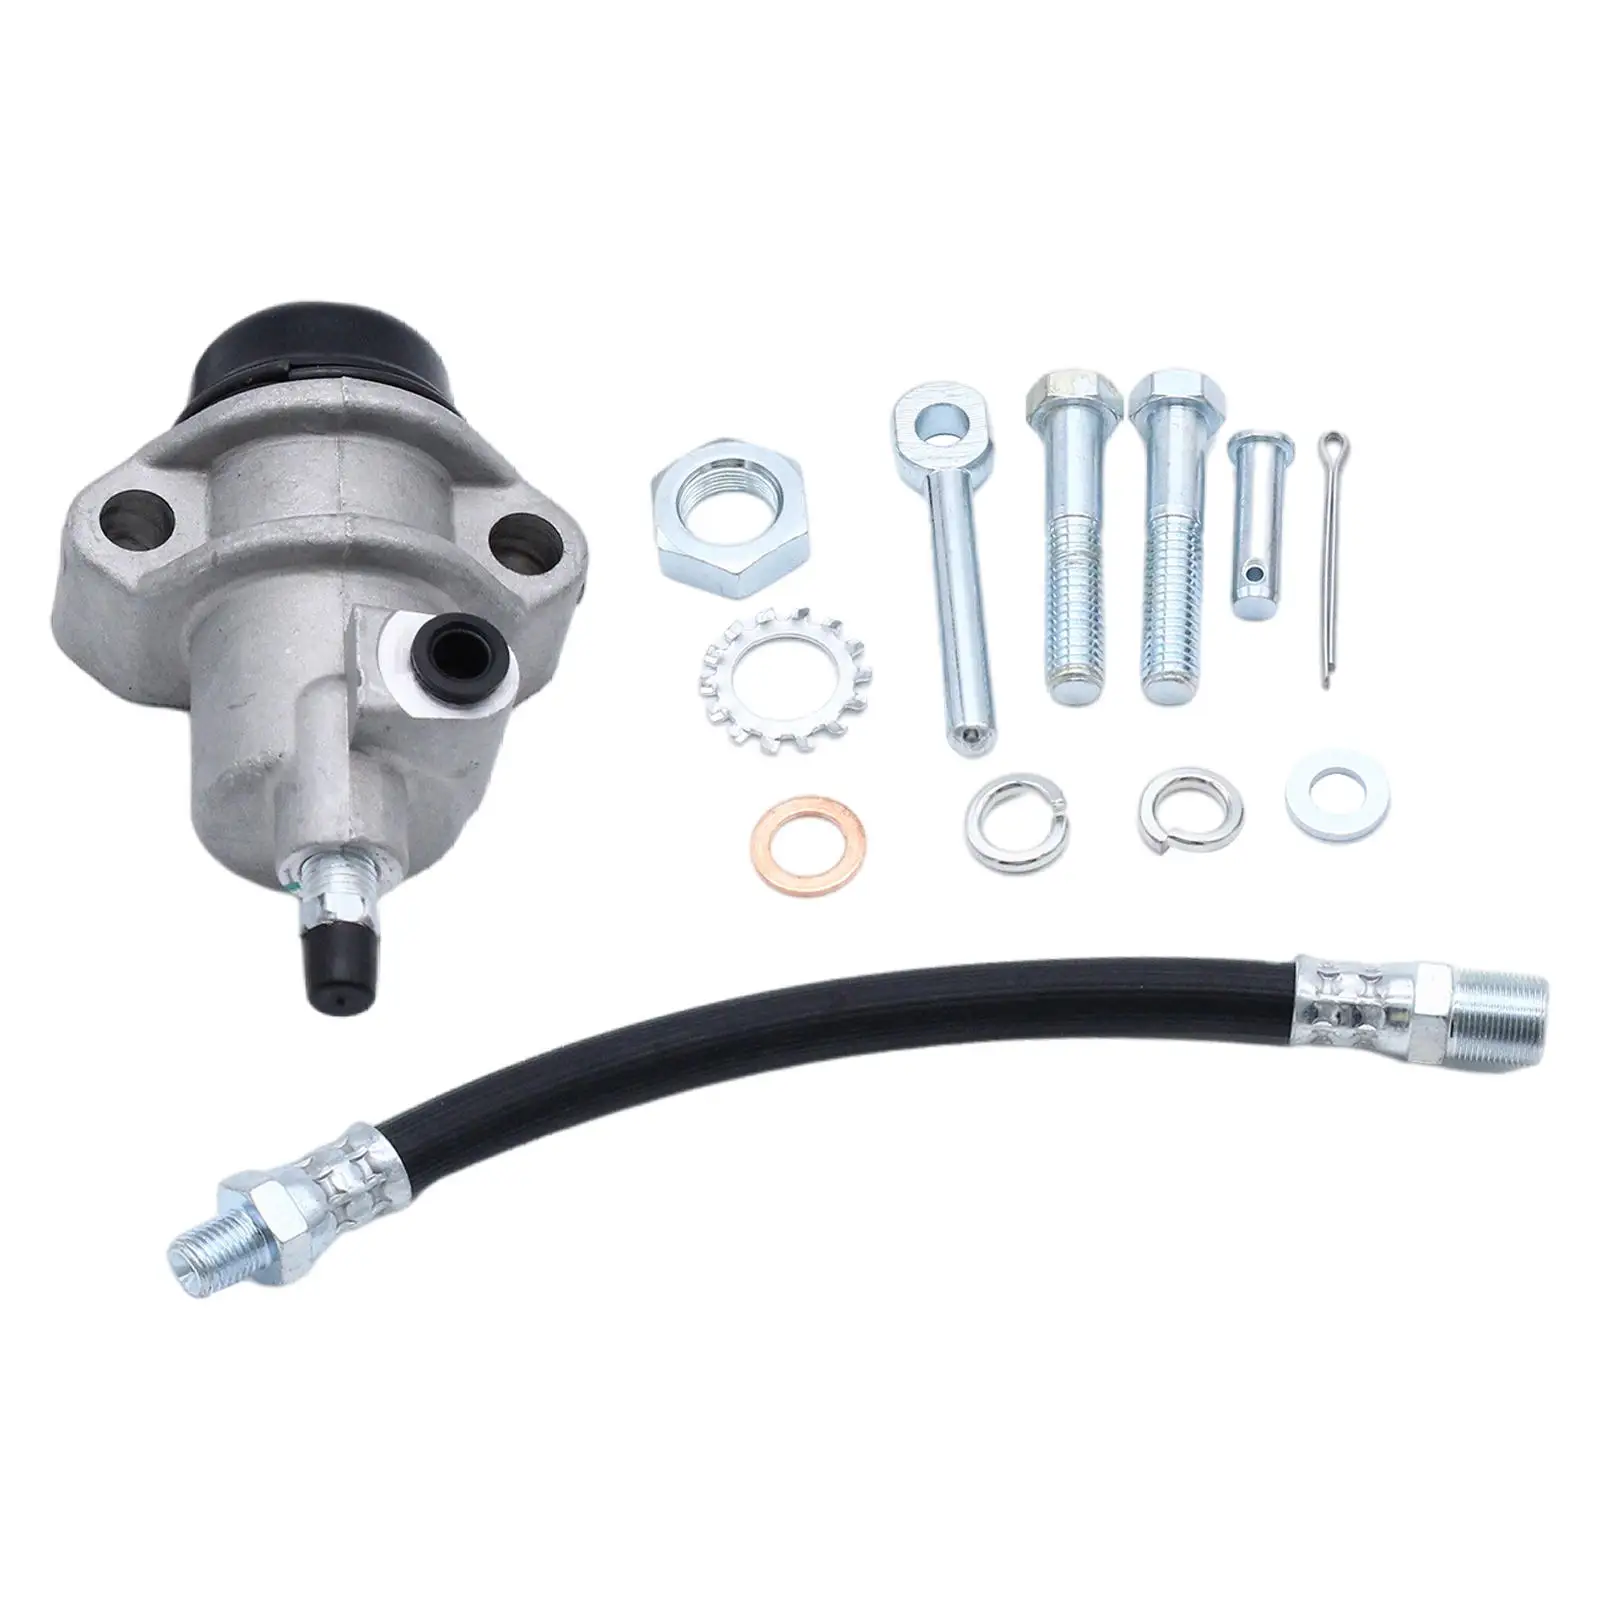 Clutch Slave Cylinder Gsy106 Clutch Pump 1.8L Master Cylinder Fit for MG 1800 Convertible